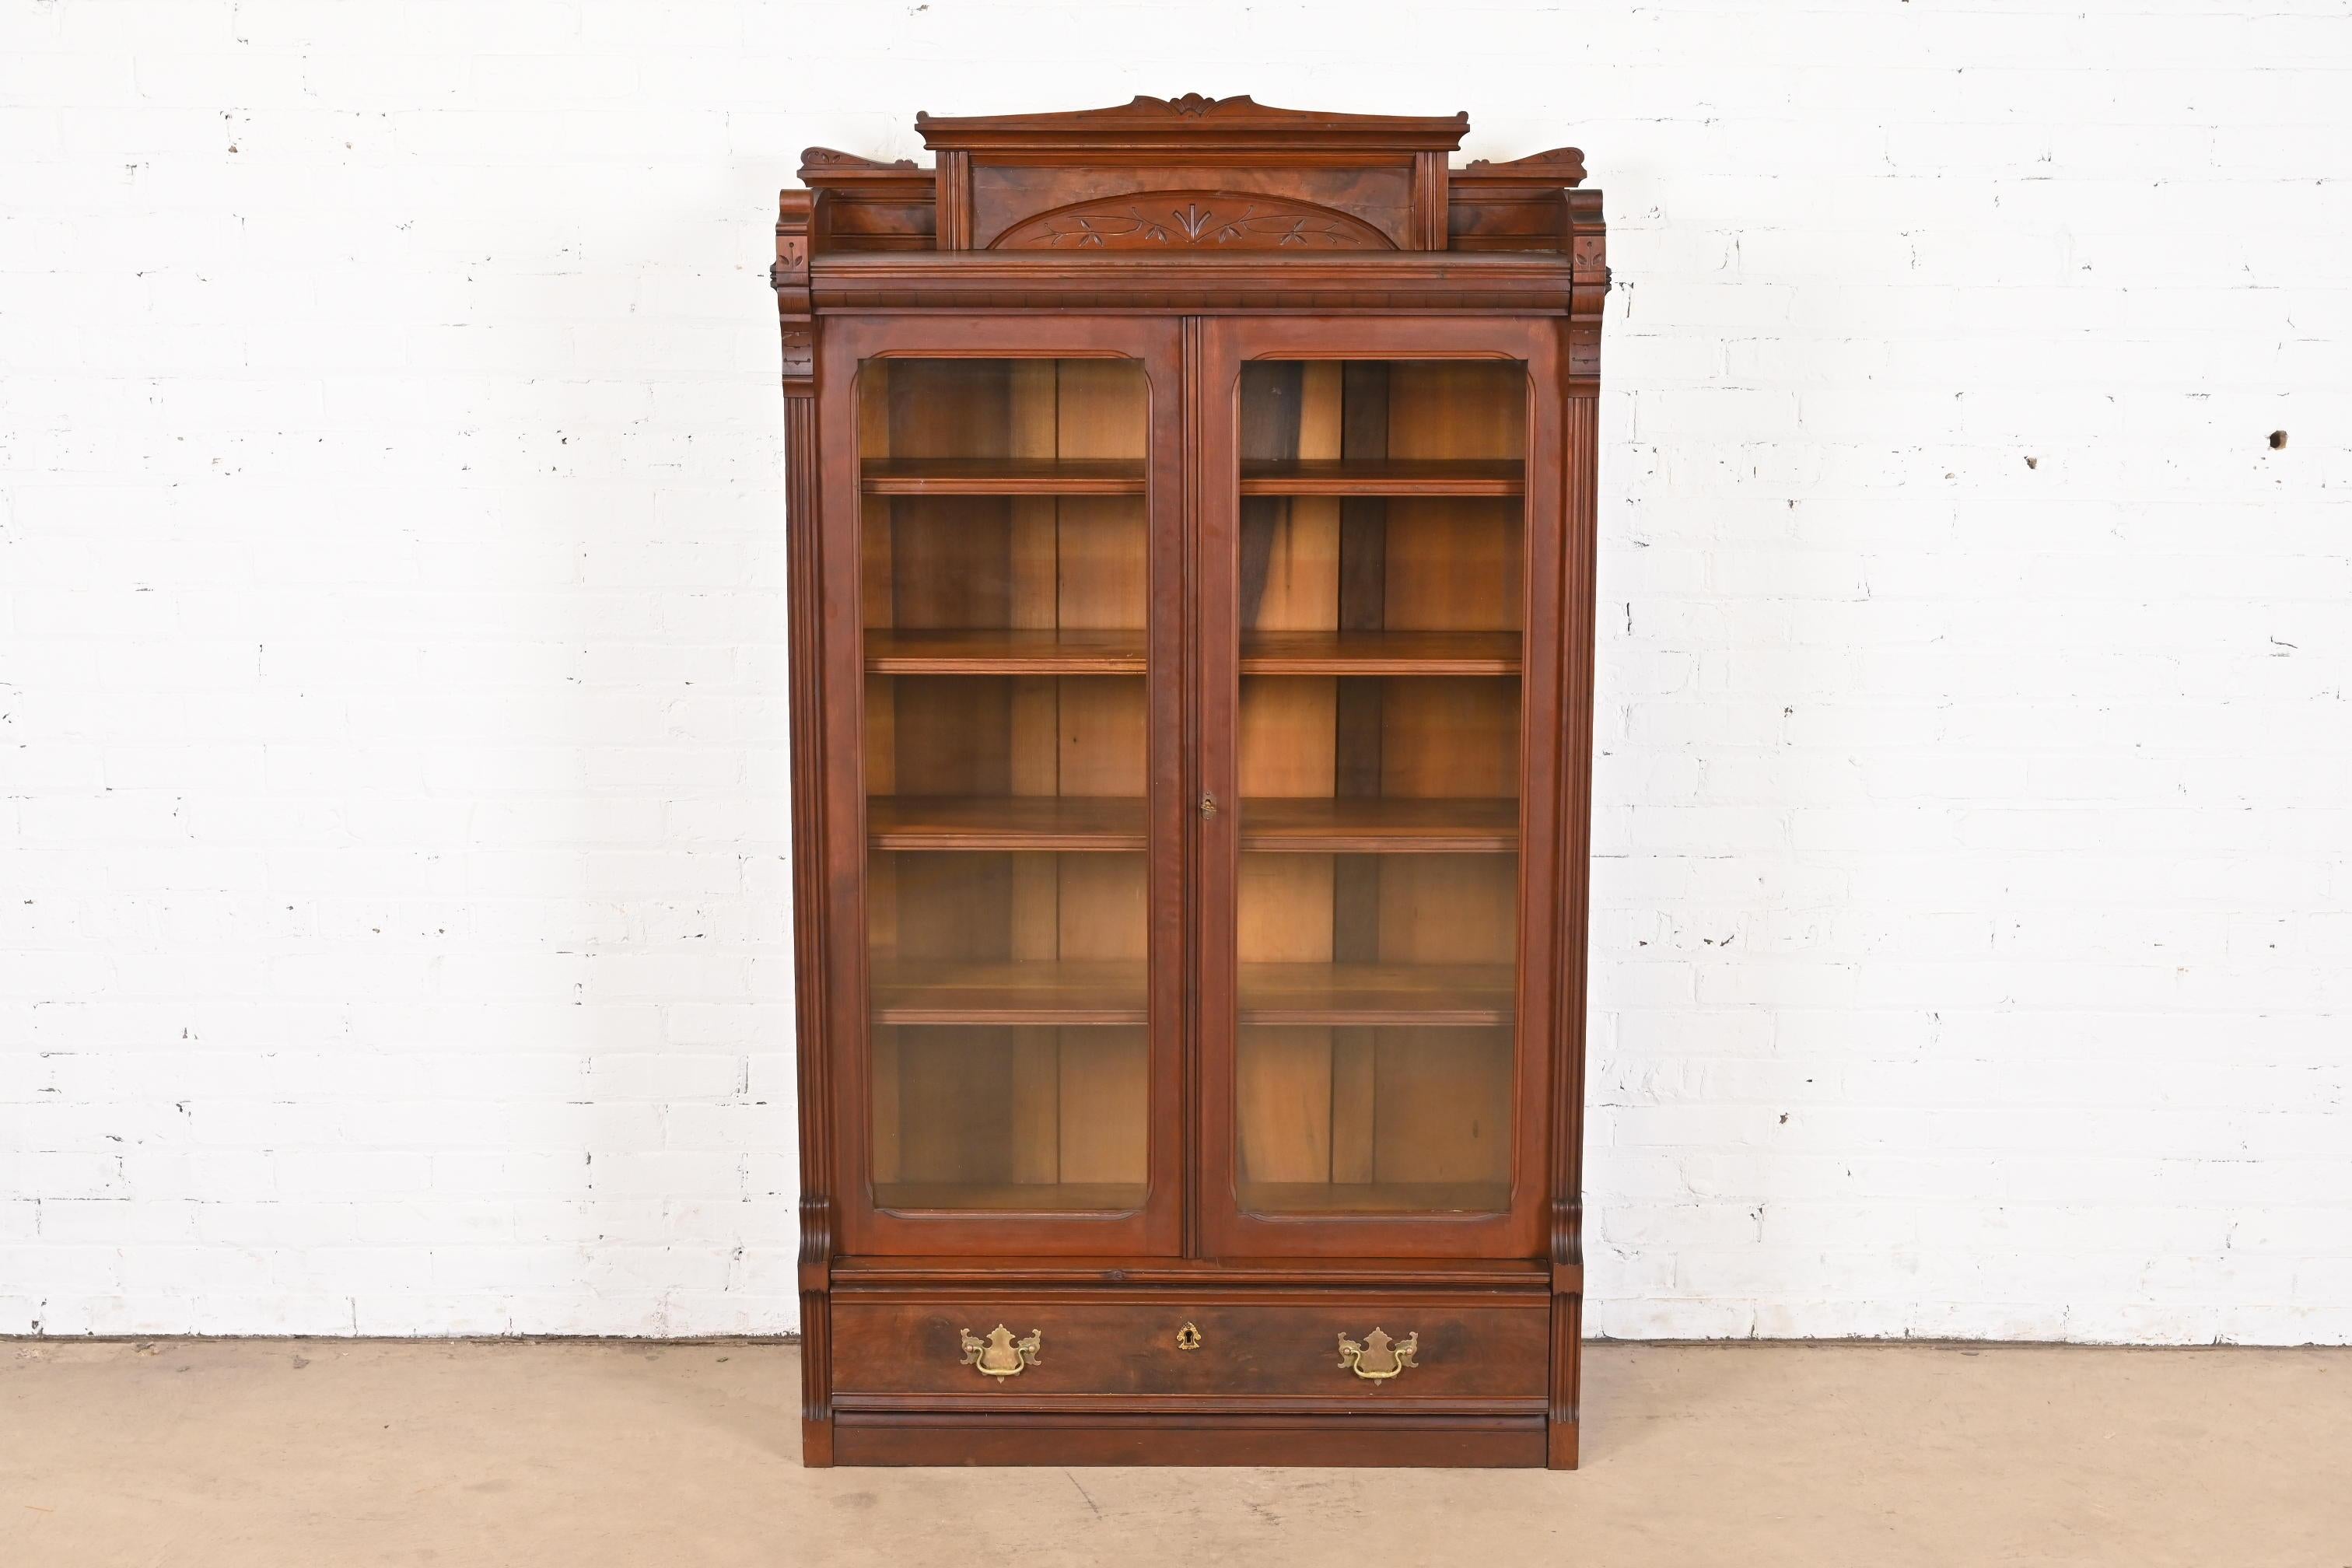 An outstanding antique Eastlake Victorian bookcase cabinet

In the manner of Herter Brothers

USA, Circa 1860s

Carved walnut, with burled walnut panels, glass front doors, and brass hardware.

Measures: 38.75